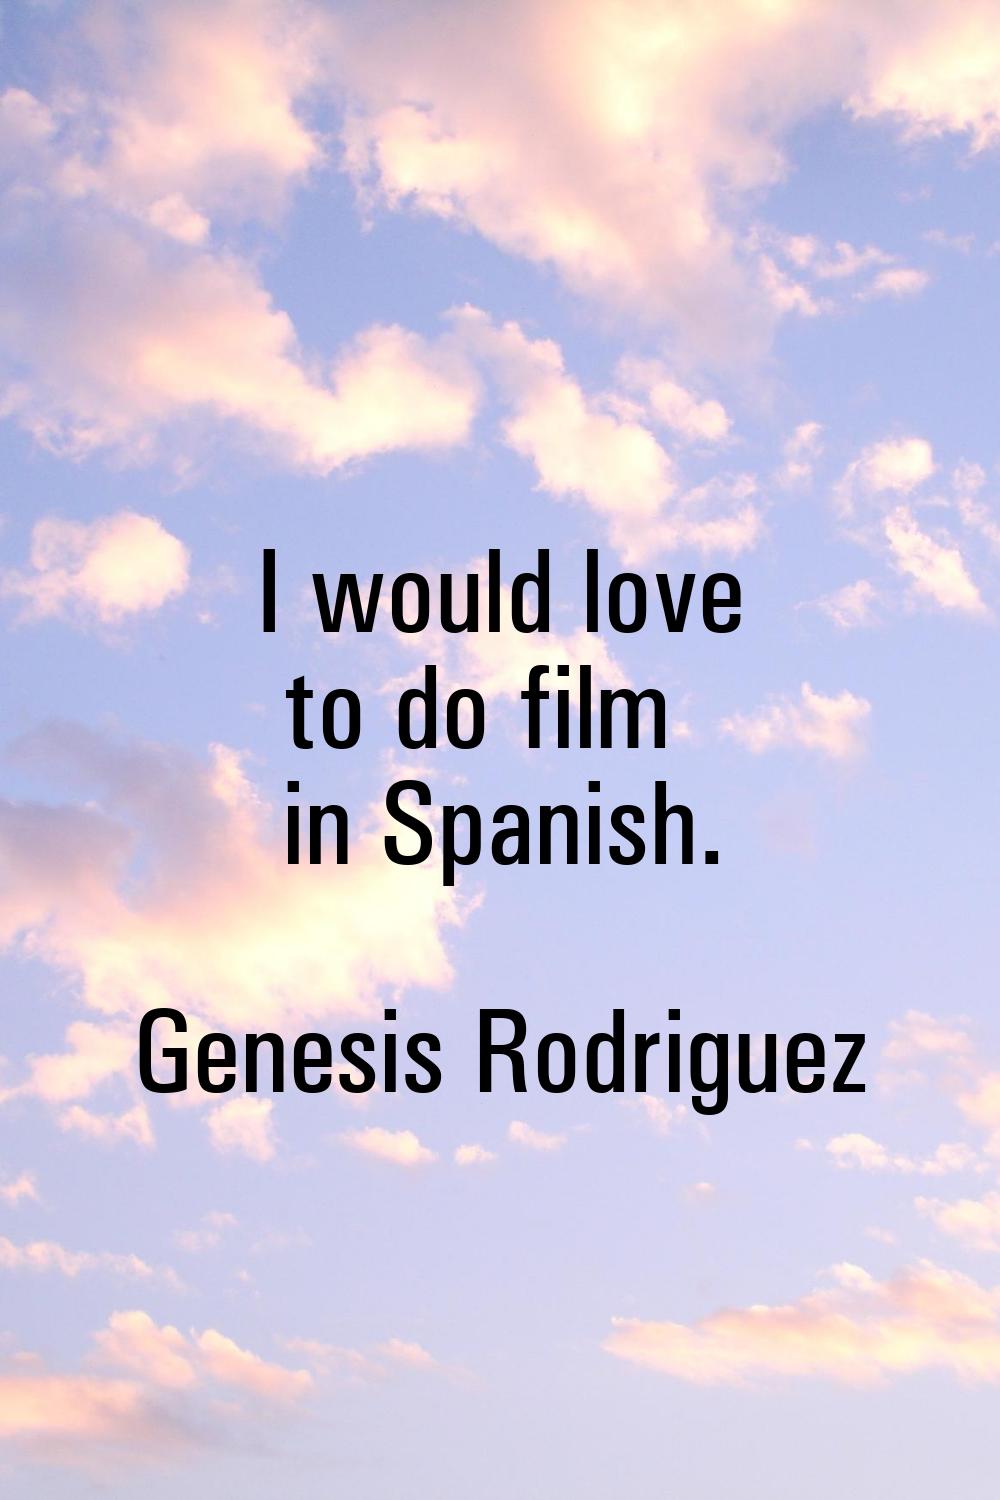 I would love to do film in Spanish.